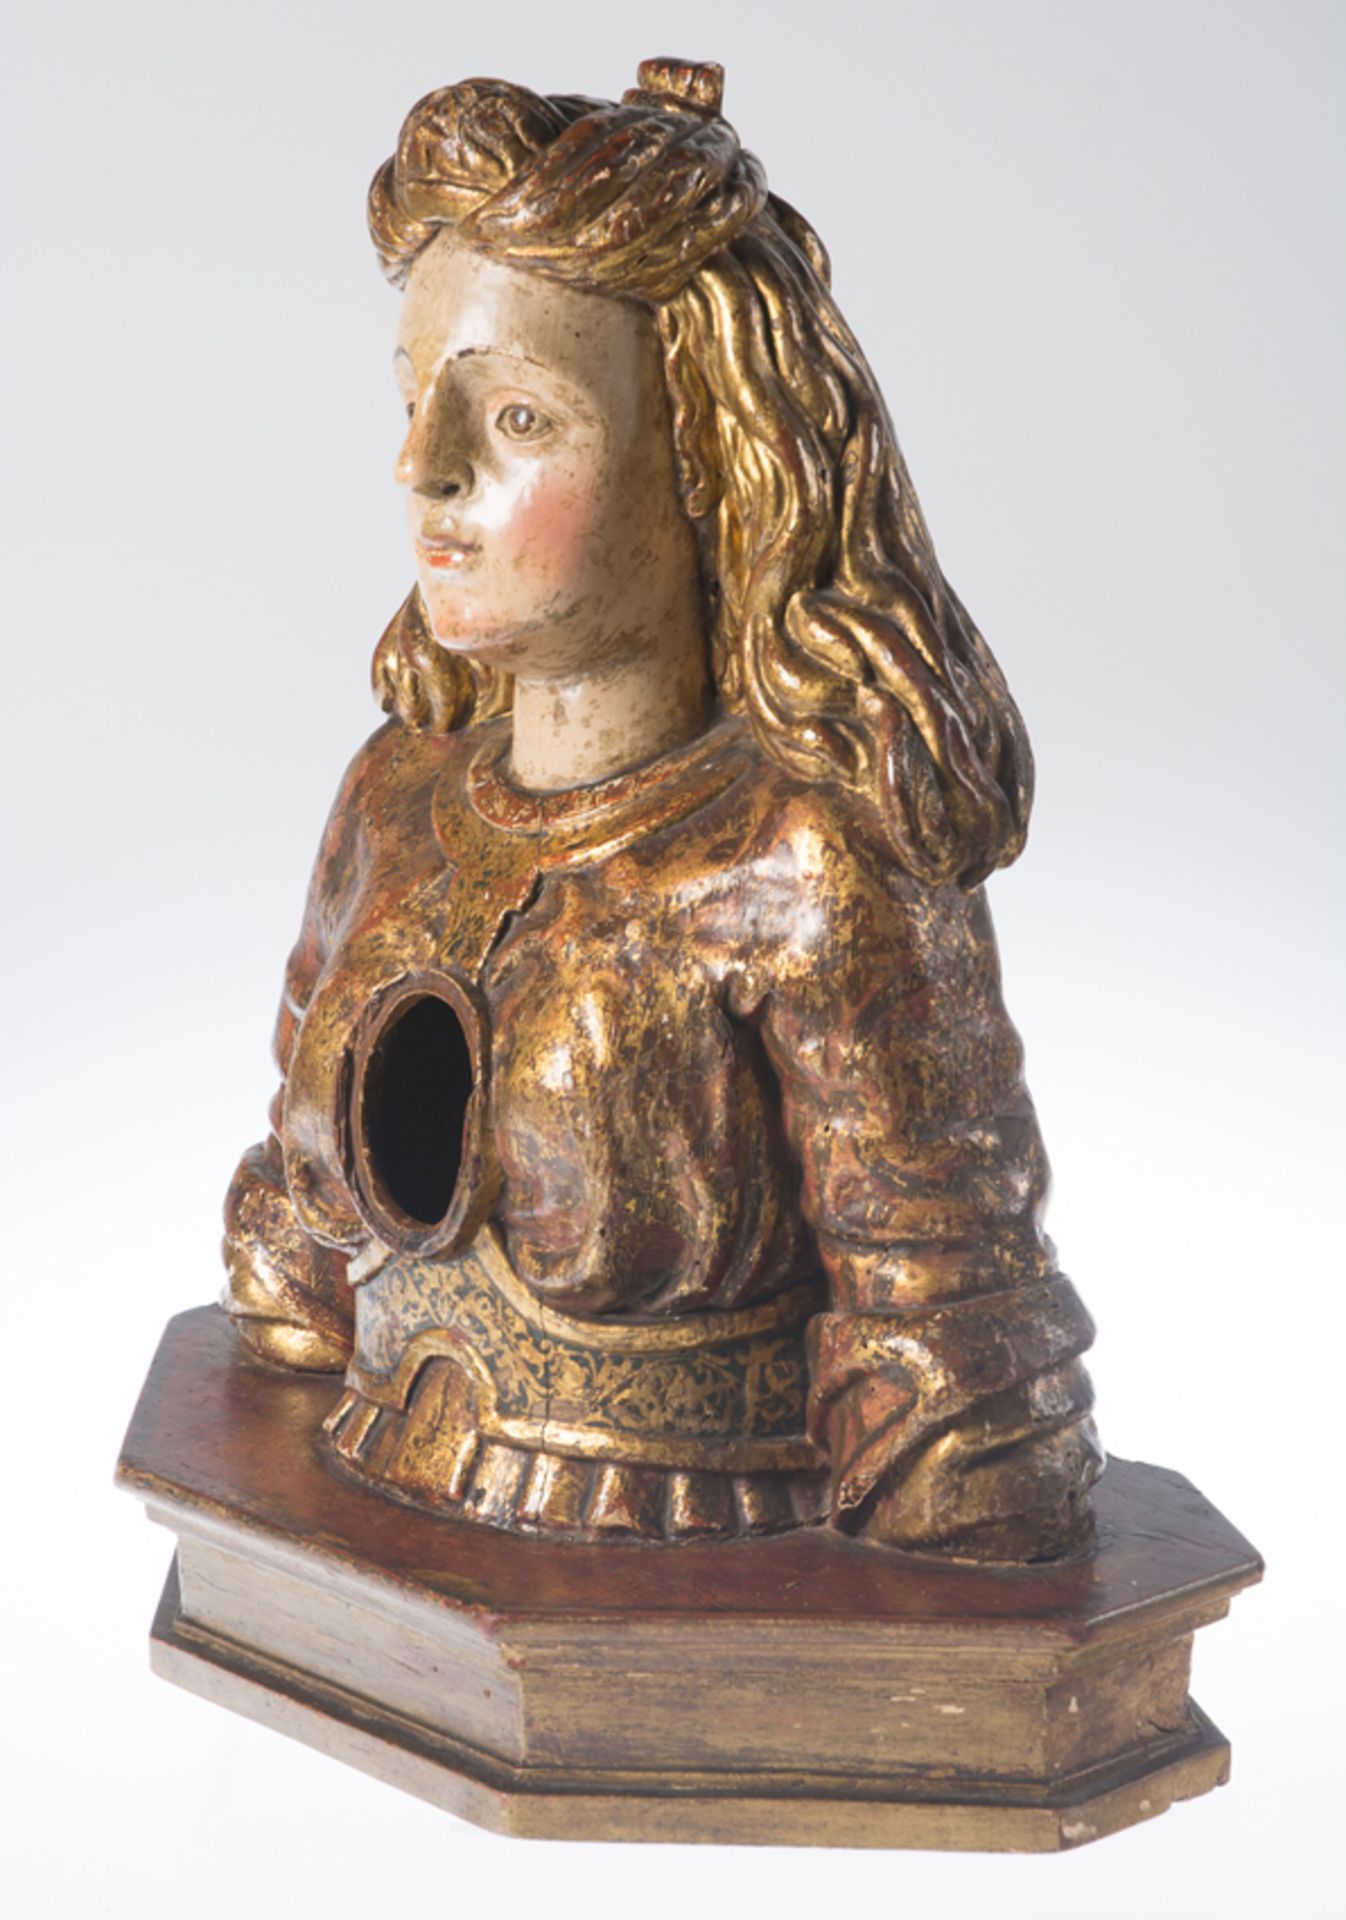 Reliquary bust. Carved, gilded, estofado and polychromed wooden sculpture. Spanish School. 16th cen - Bild 3 aus 8